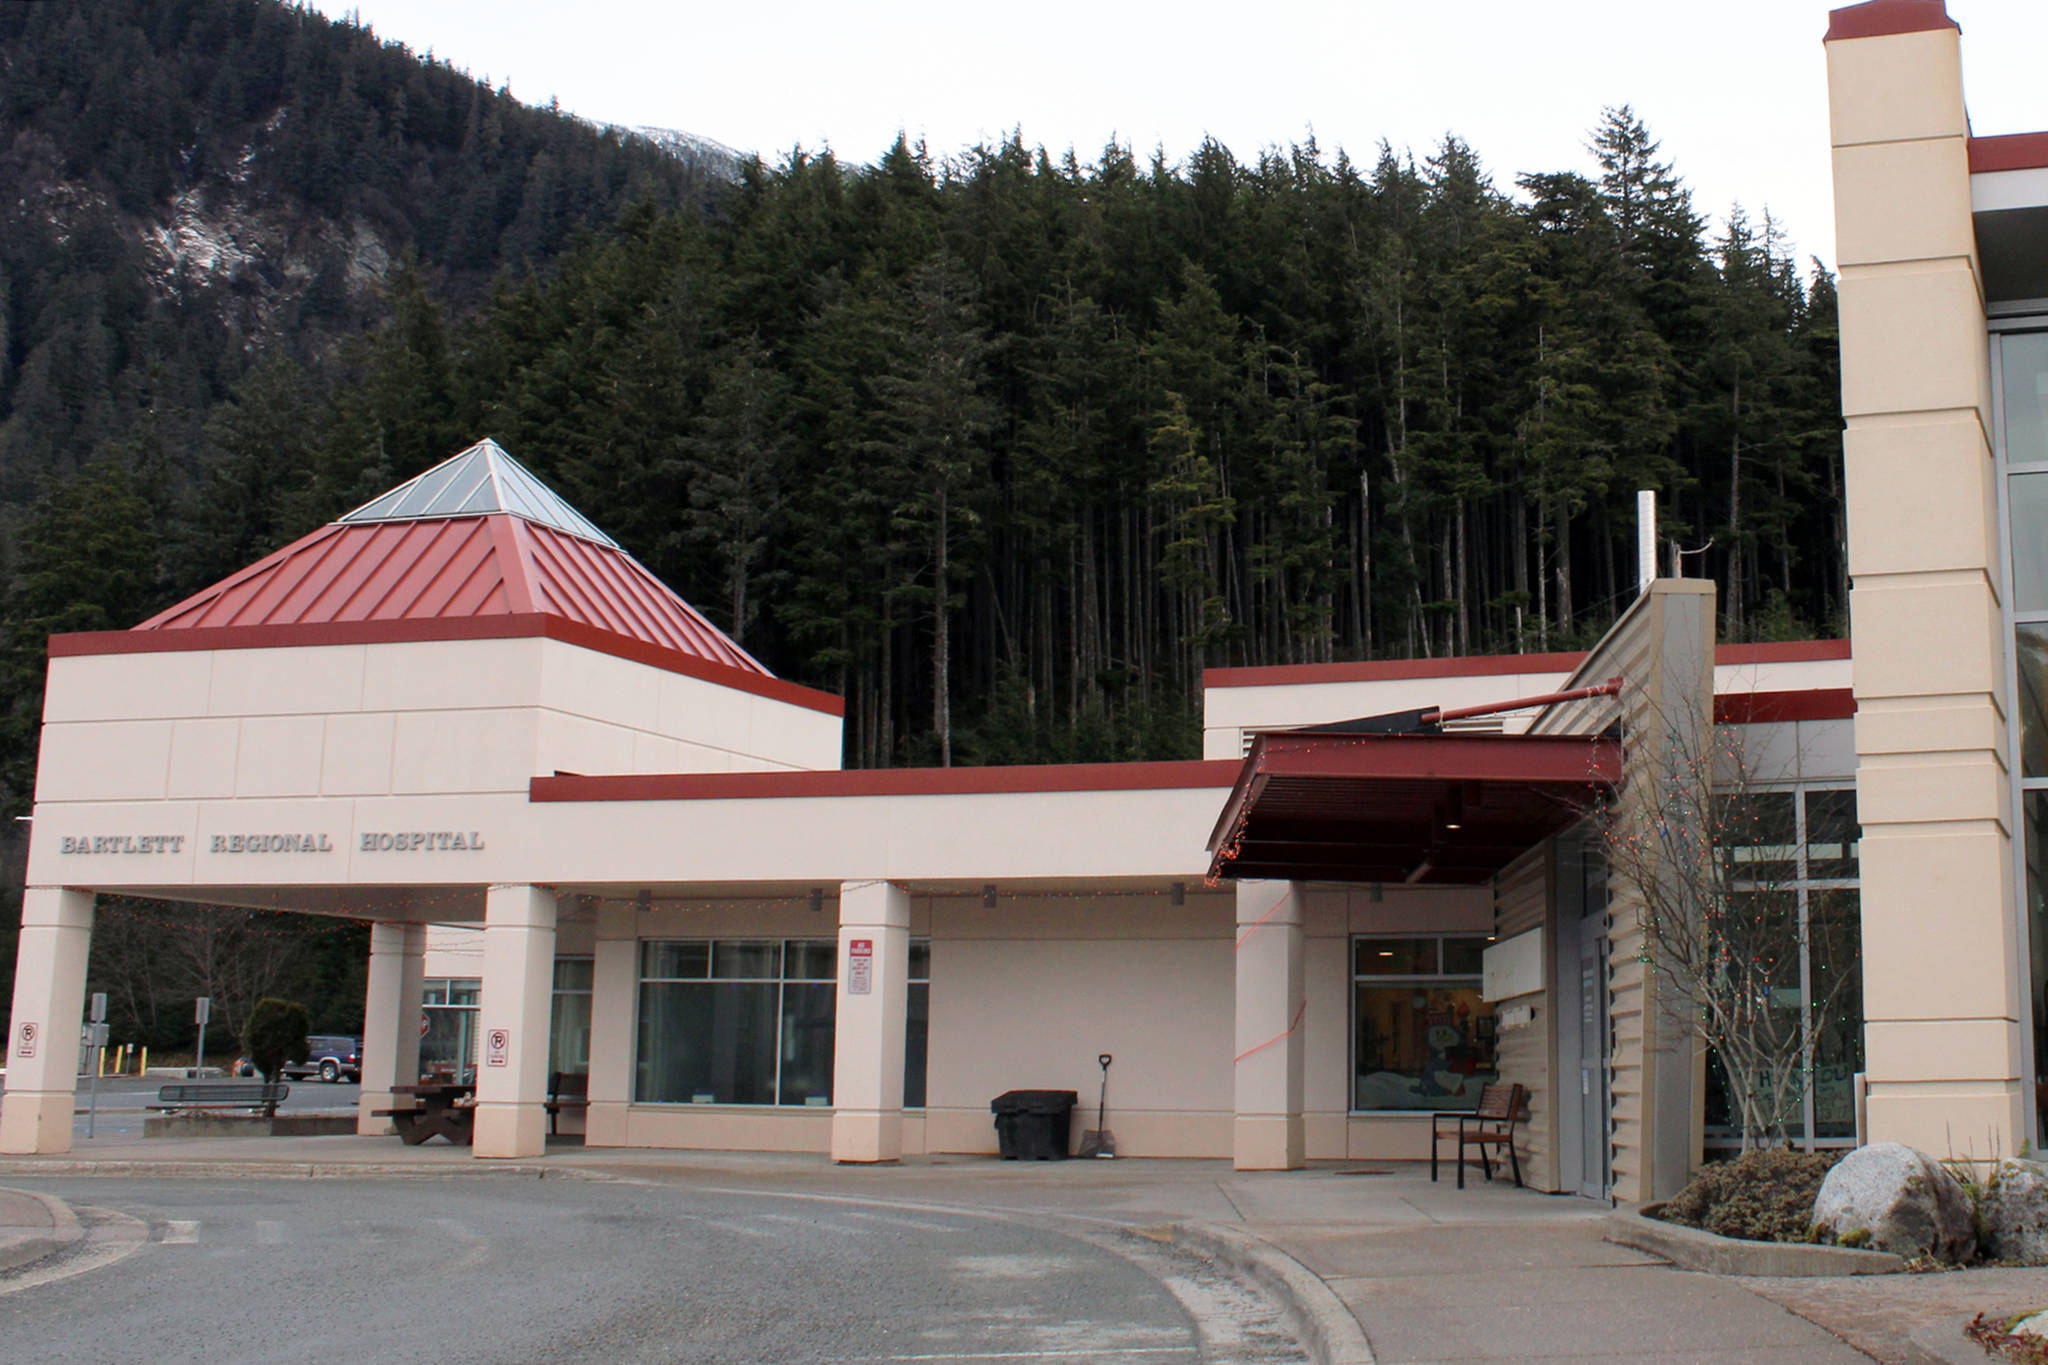 A sixth death from the coronavirus, which occurred at Bartlett Regional Hospital, shown in this January 2021 photo, was reported on Wednesday, Aug. 11, 2021. (Ben Hohenstattl / Juneau Empire File)